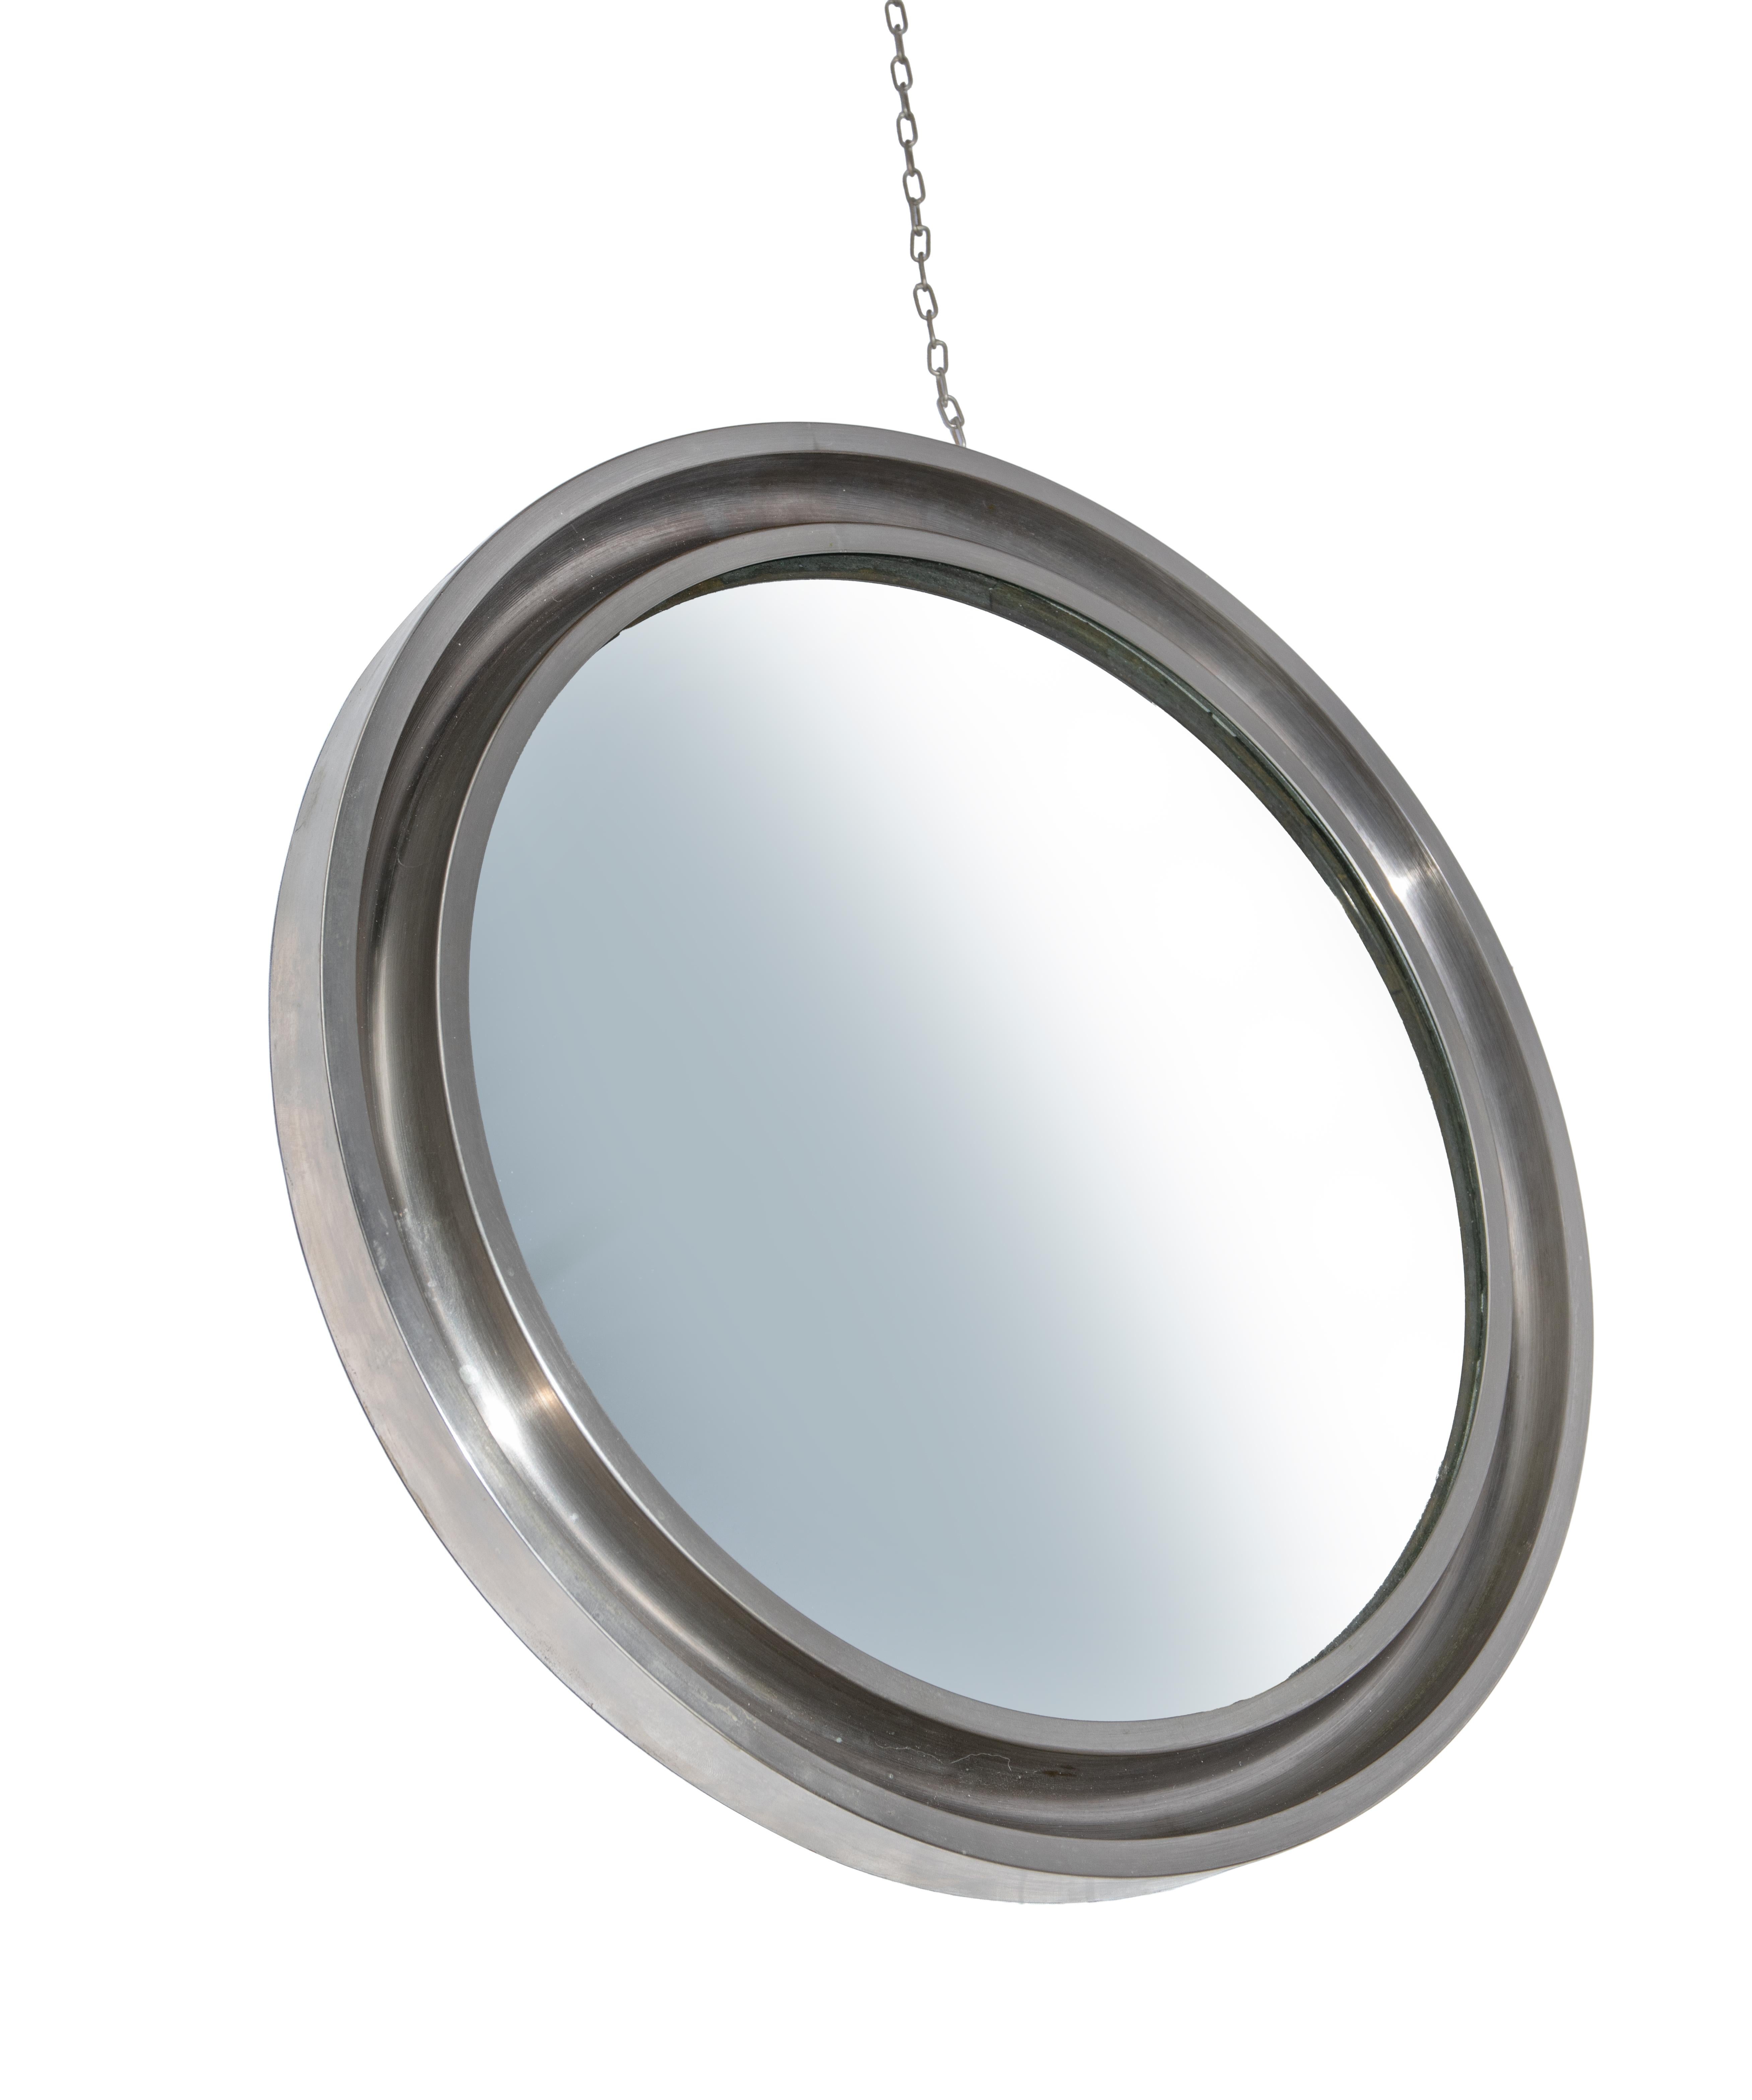 Vintage Round Mirror by Sergio Mazza for Artemide, Italy 1961.

Gilded Aluminium. 

Good conditions